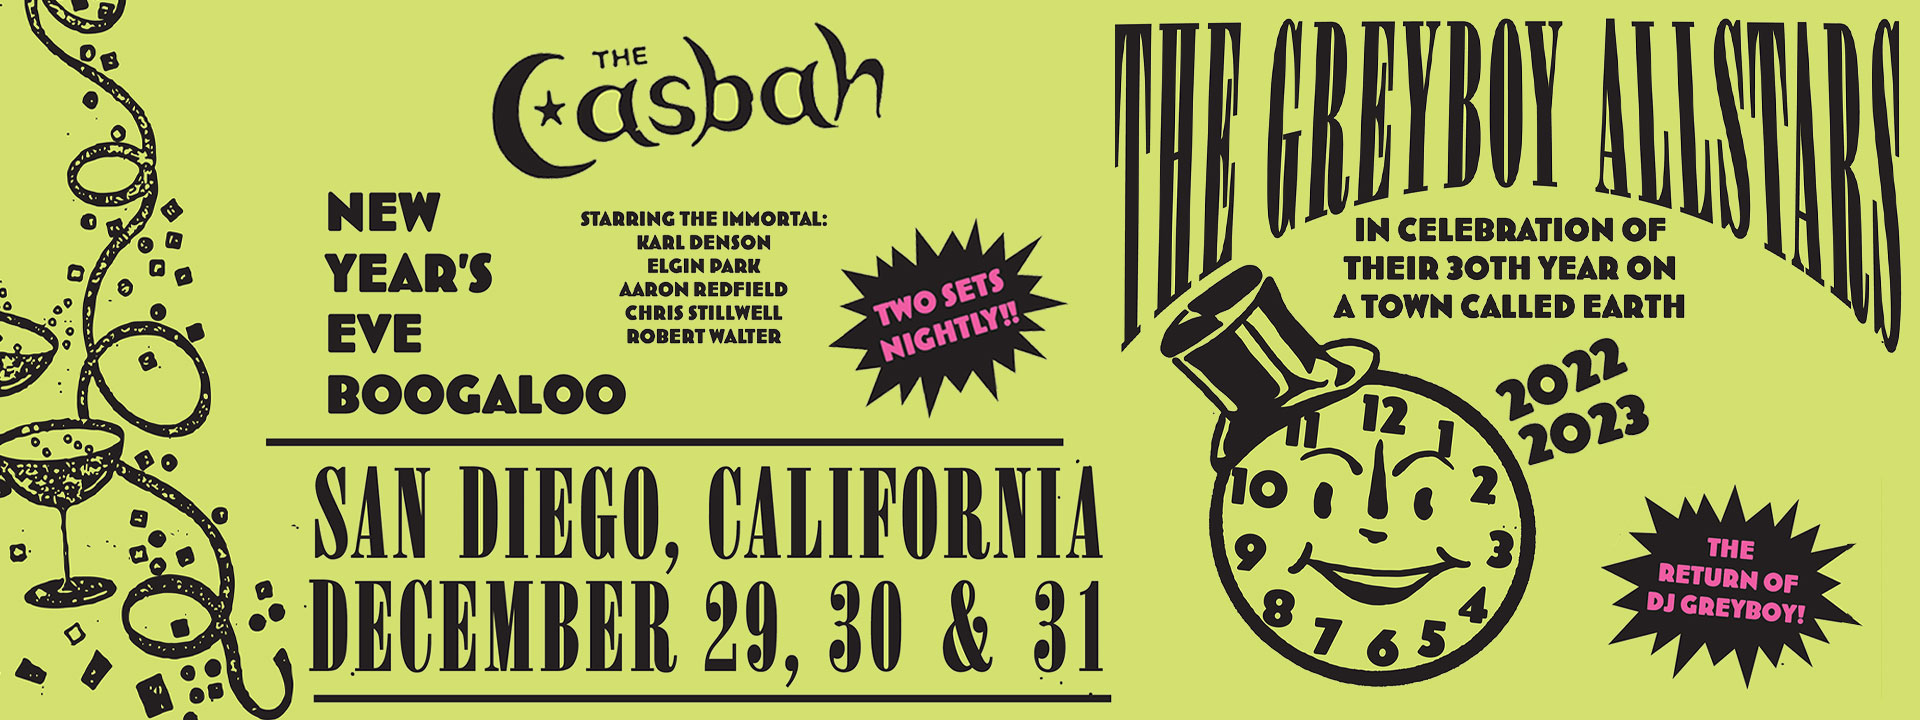 The Greyboy Allstars New Years Eve at the Casbah